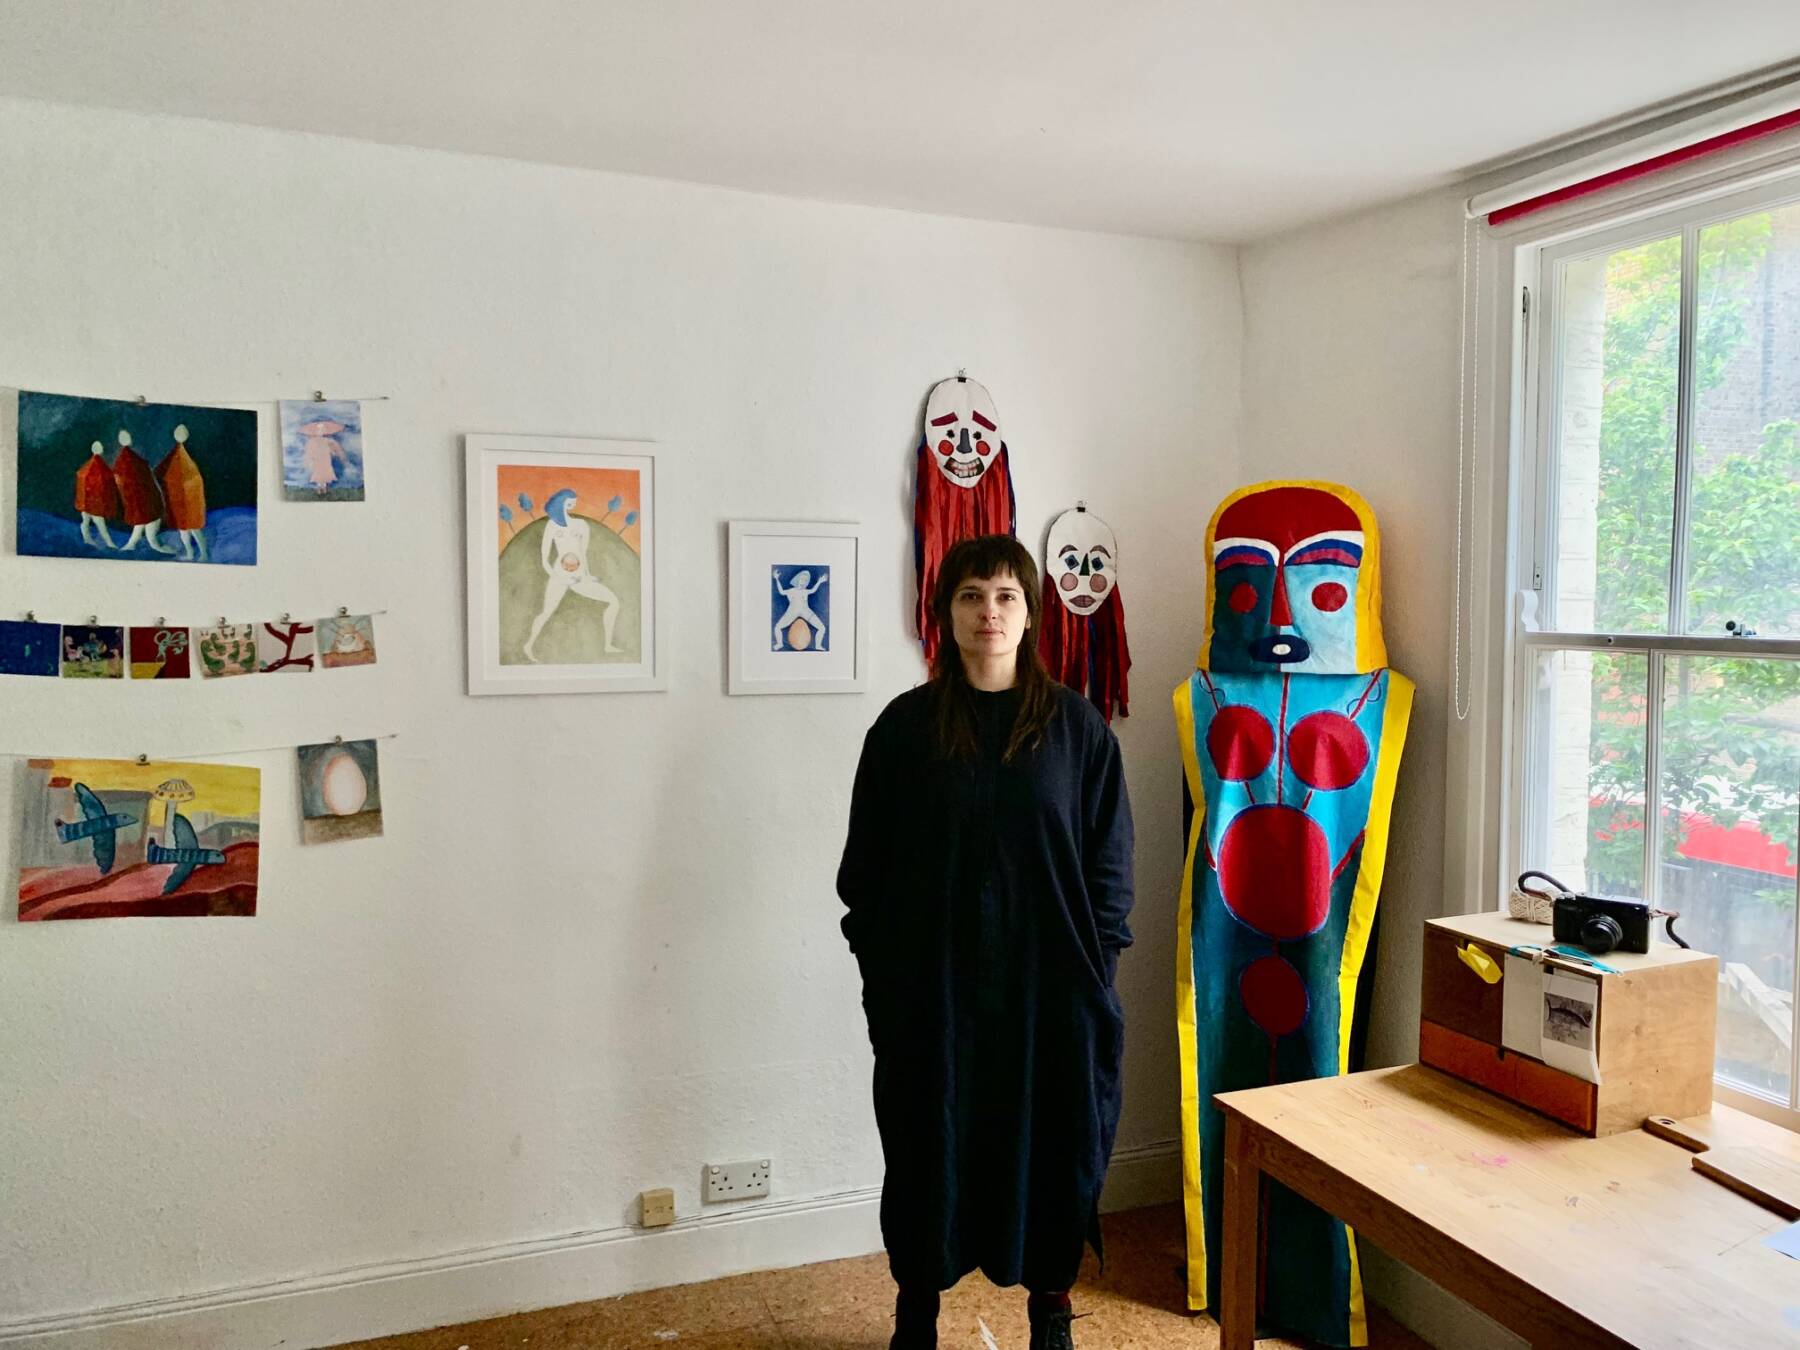 Milou Stella stands in a room with colorful artowrk and a costume in the corner of the room. They wear balck and have black hair with a fringe.